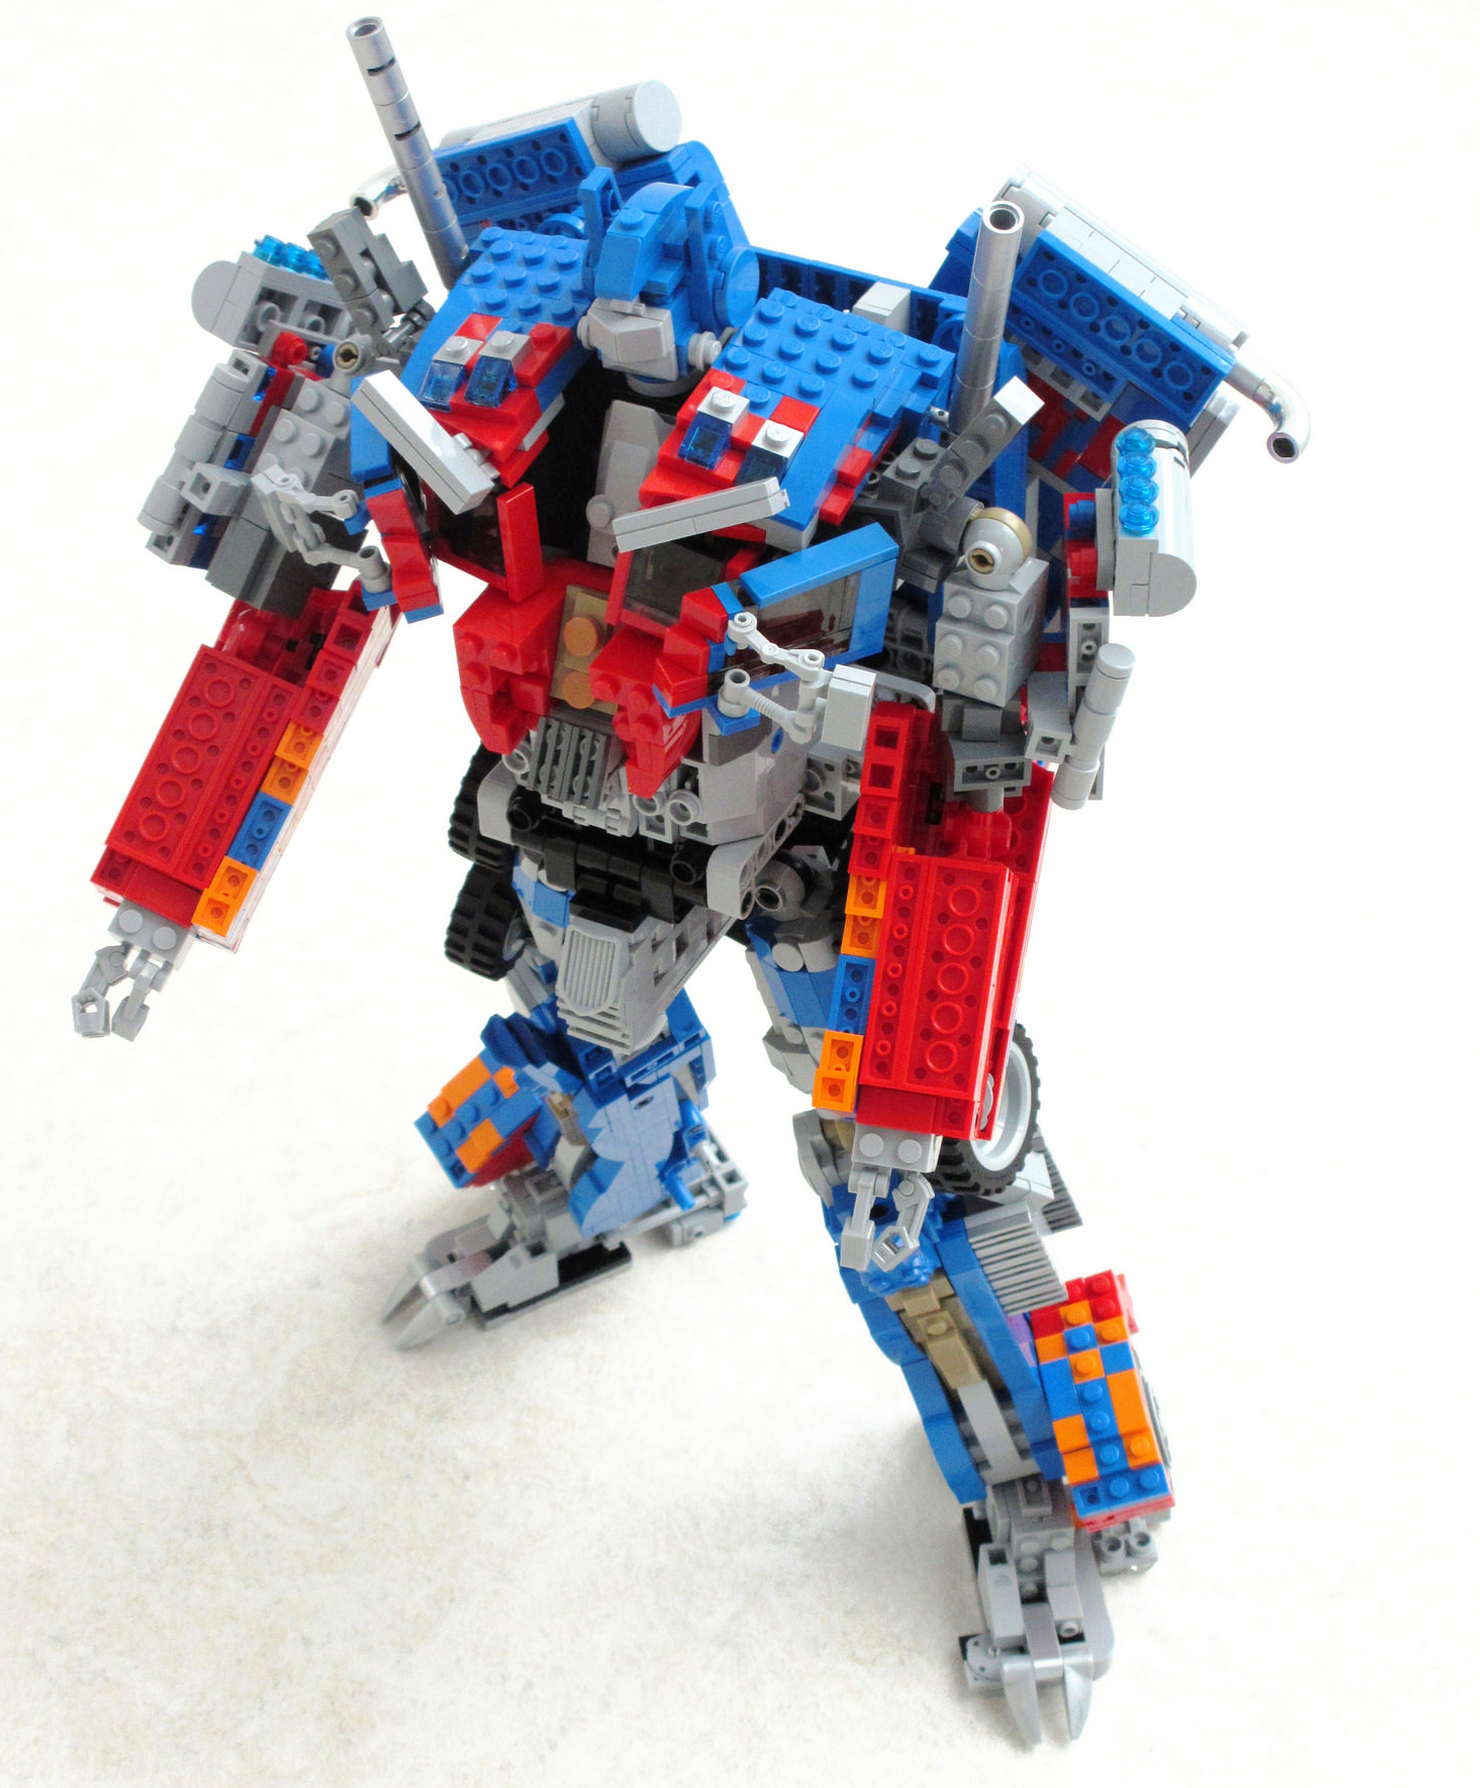 This transforming Optimus Prime LEGO build might be one of the most impressive yet